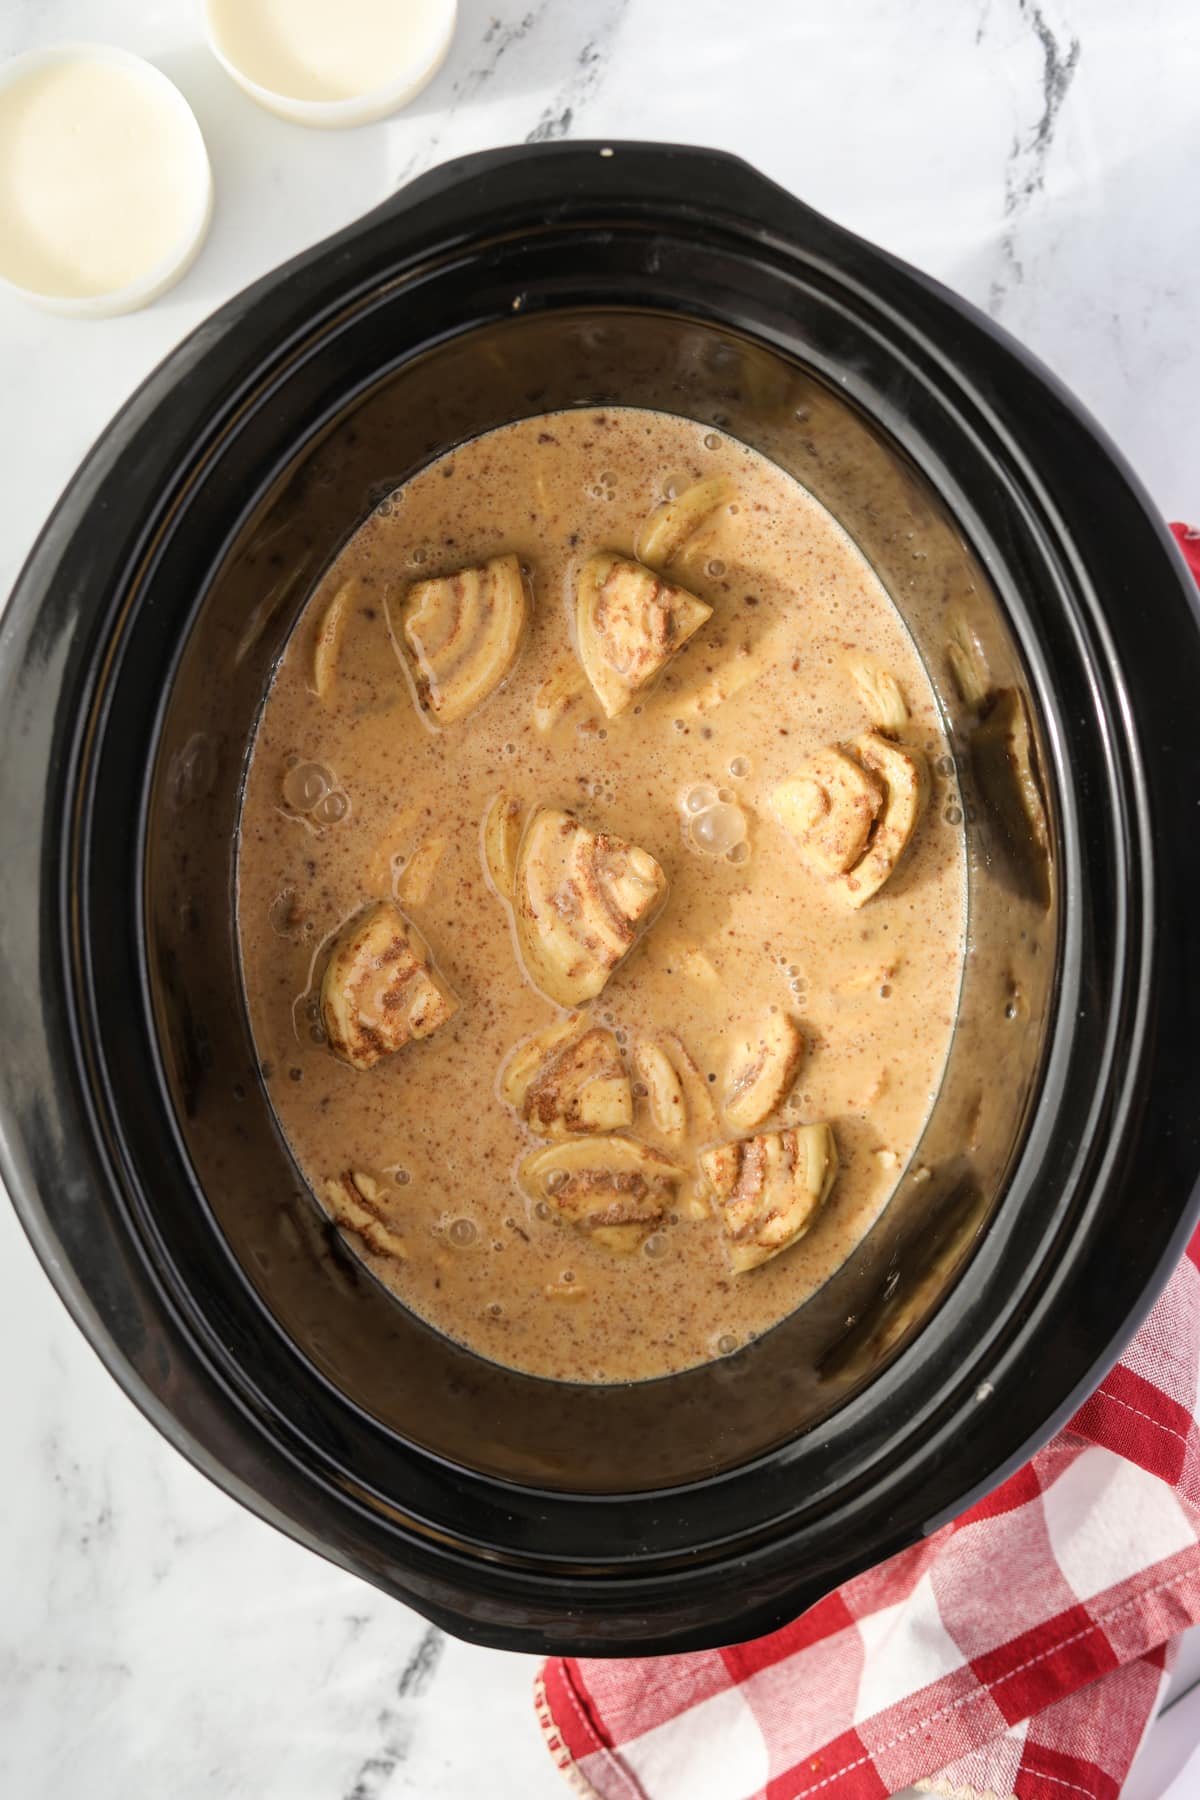 A slow cooker filled with cinnamon roll pieces and a custard mixture.